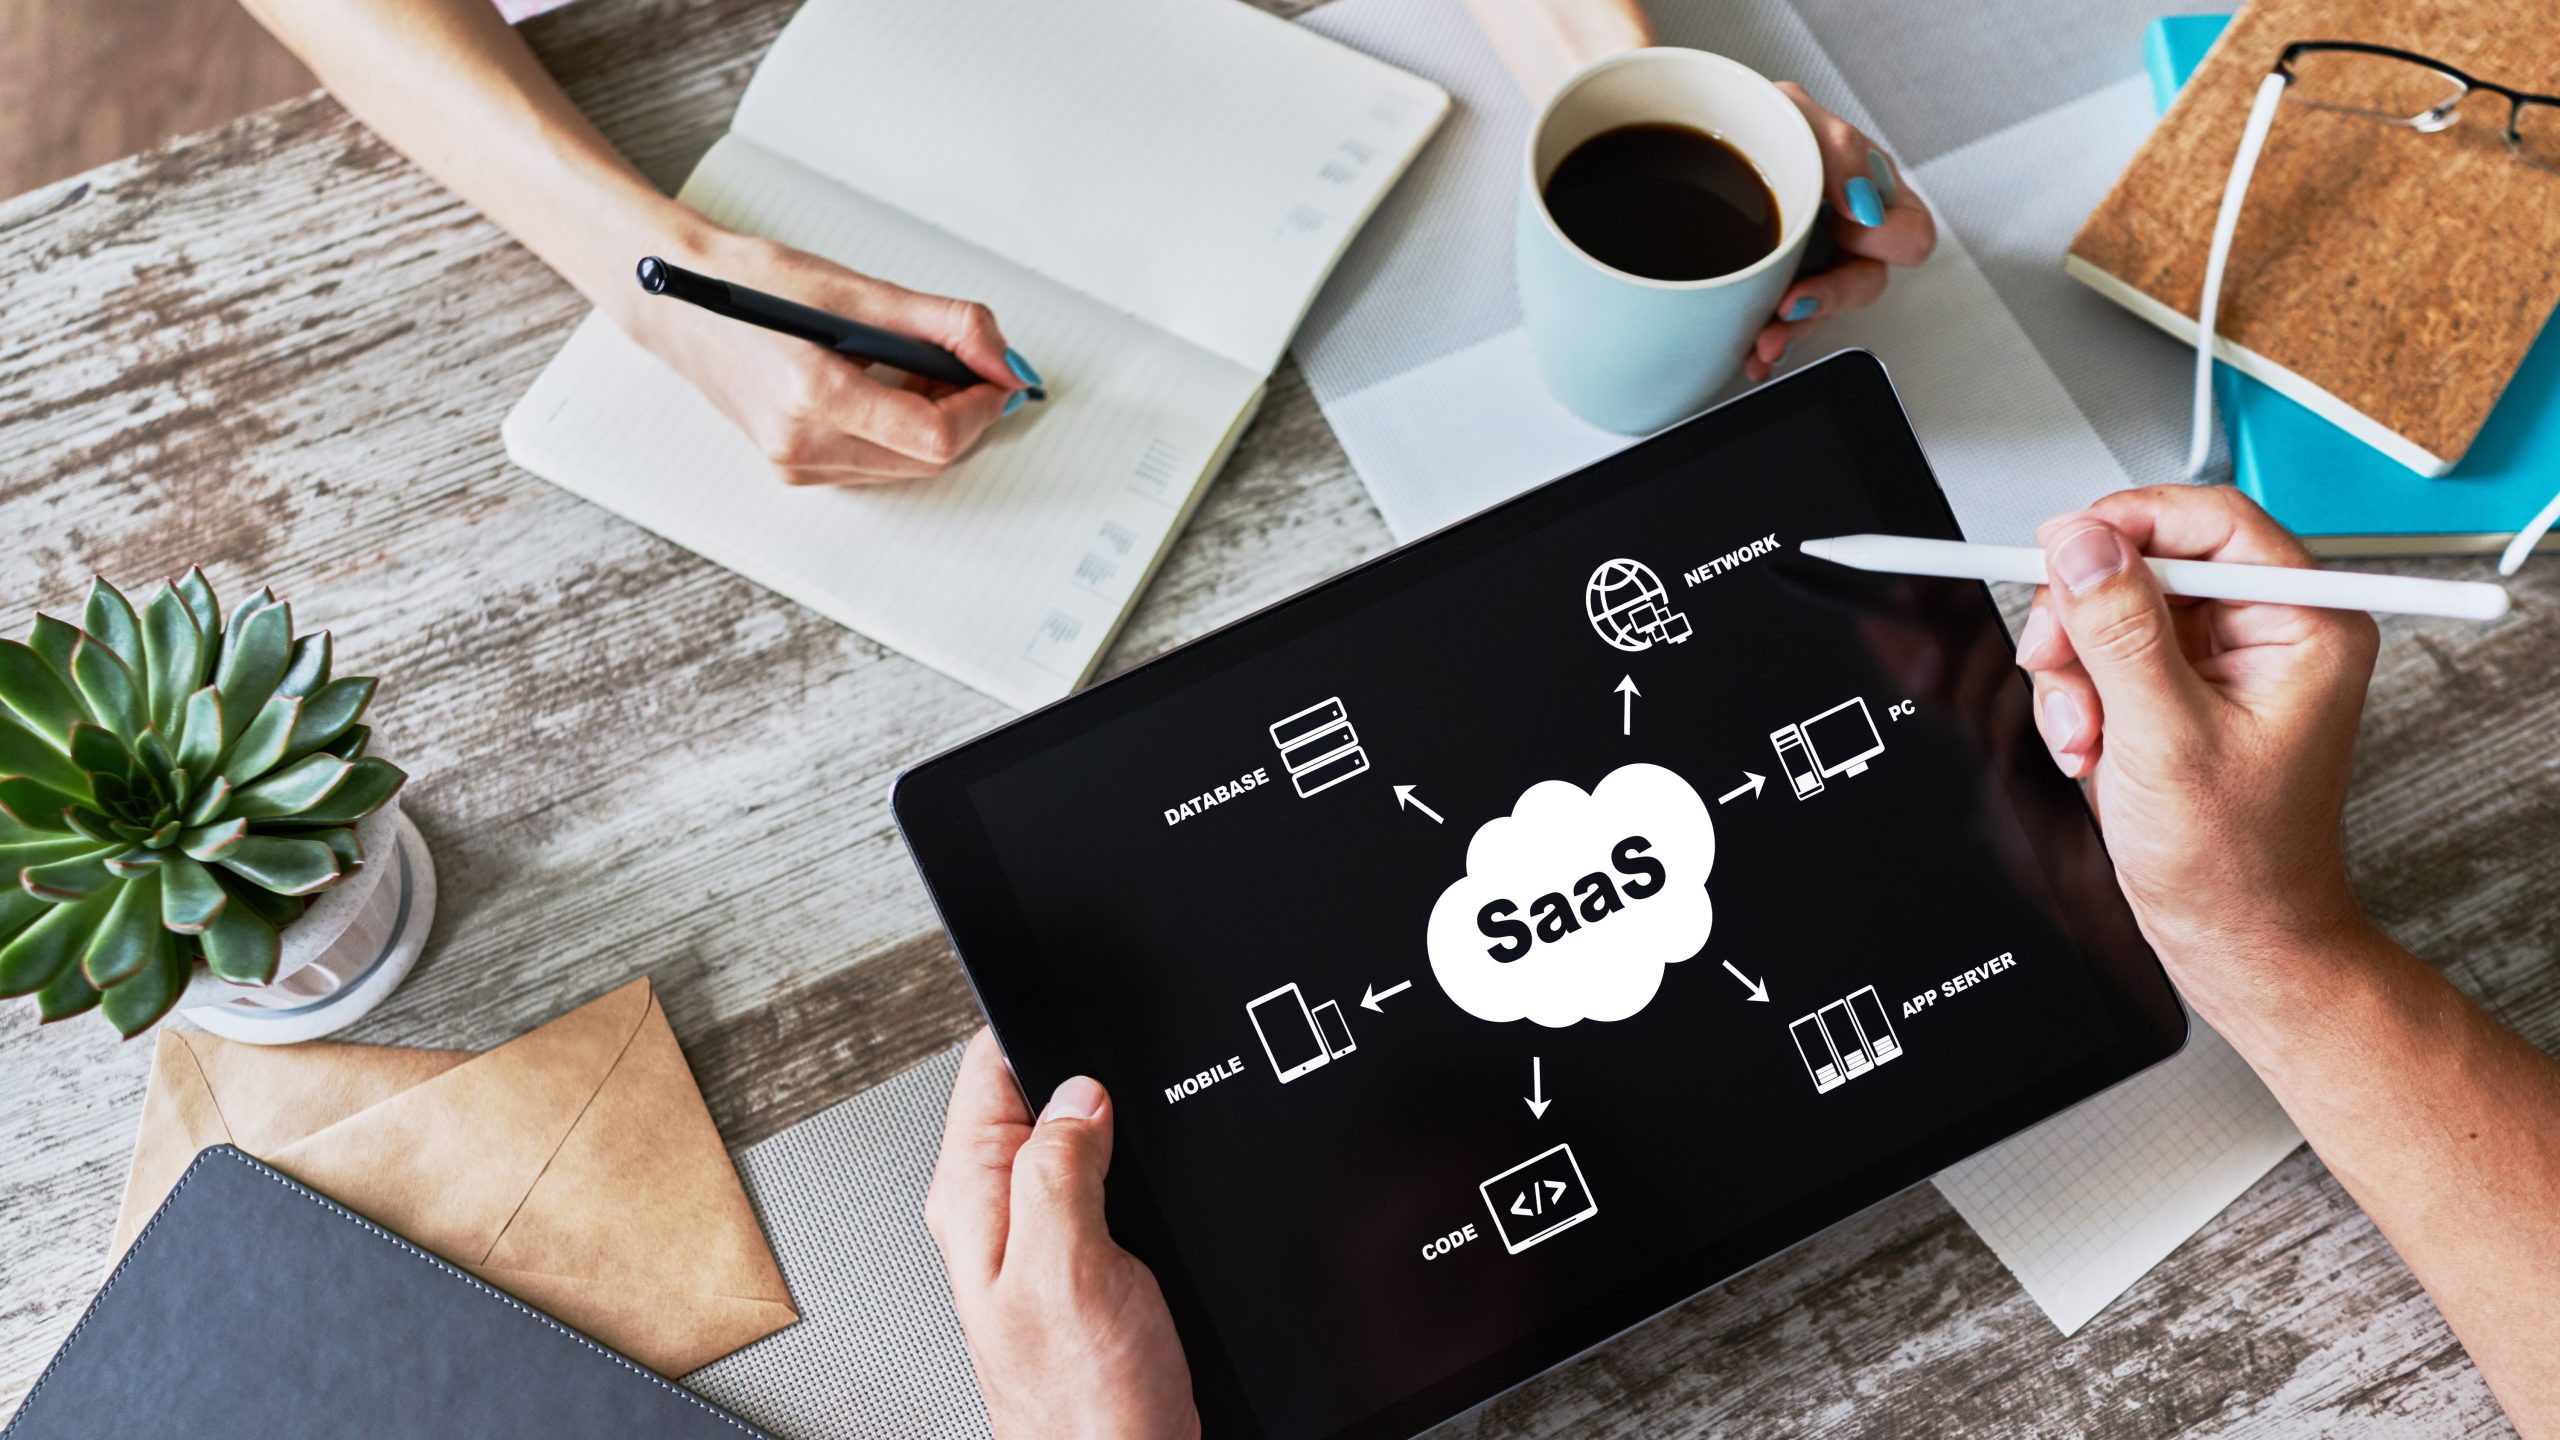 SaaS – software as a service. Internet and technology concept.